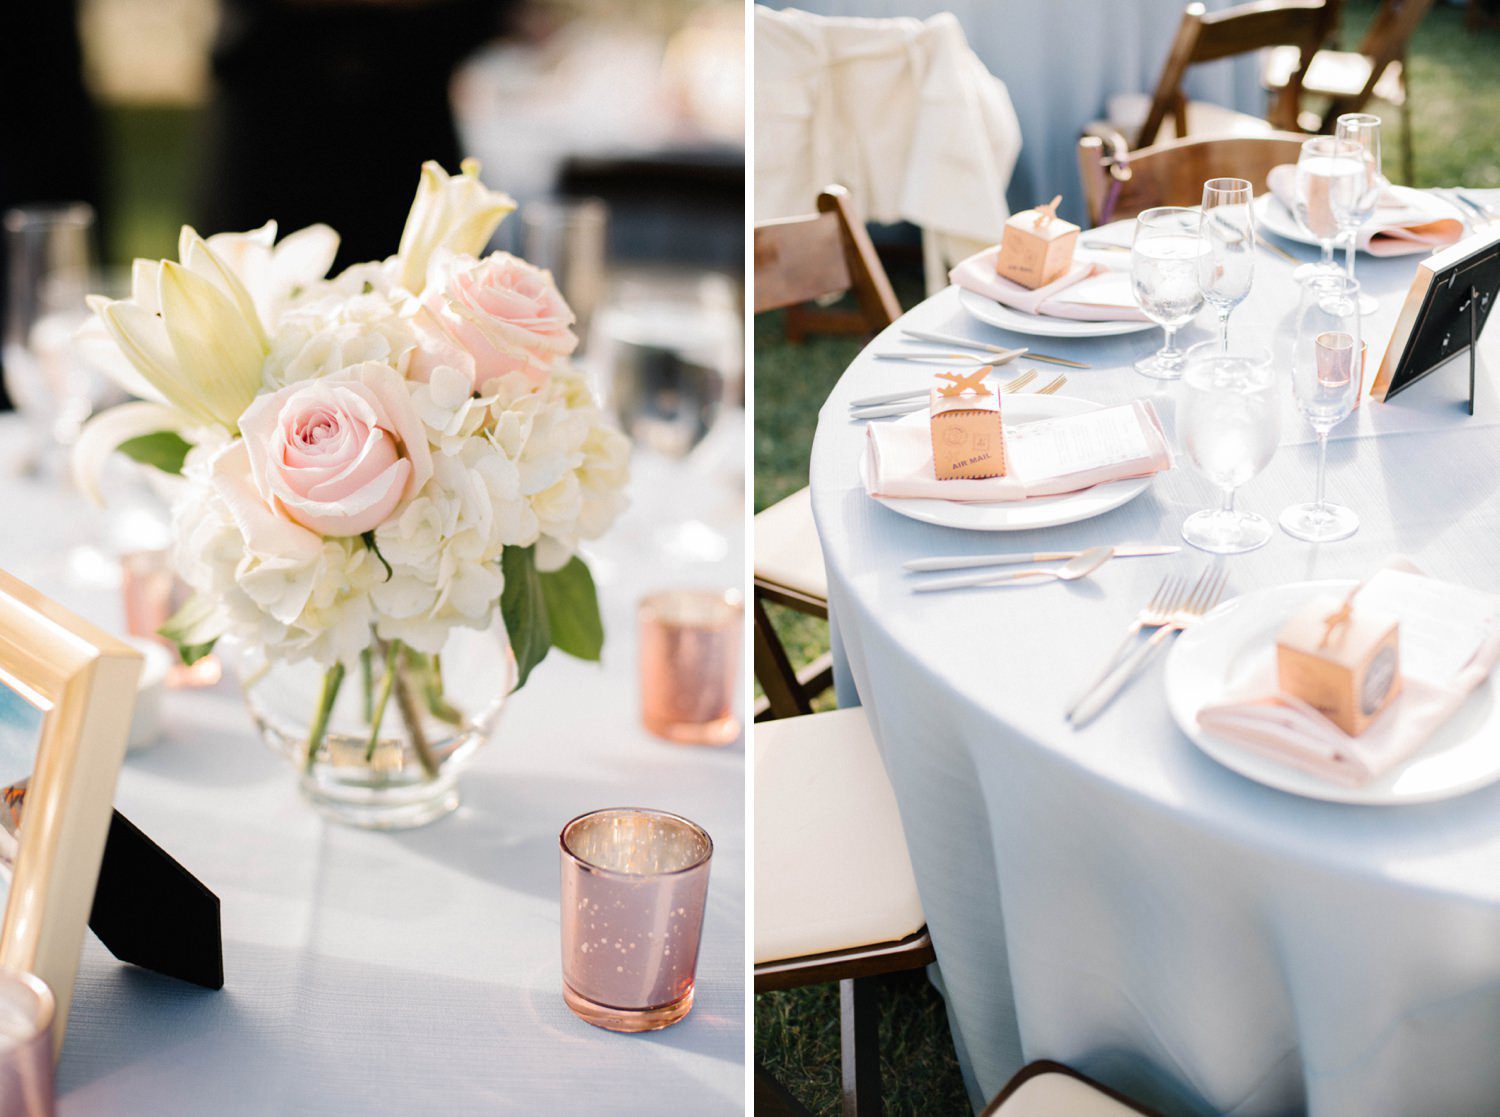 Reception flowers and place settings at Noland Castle Wedding by Pismo Wedding Photographer Austyn Elizabeth Photography.